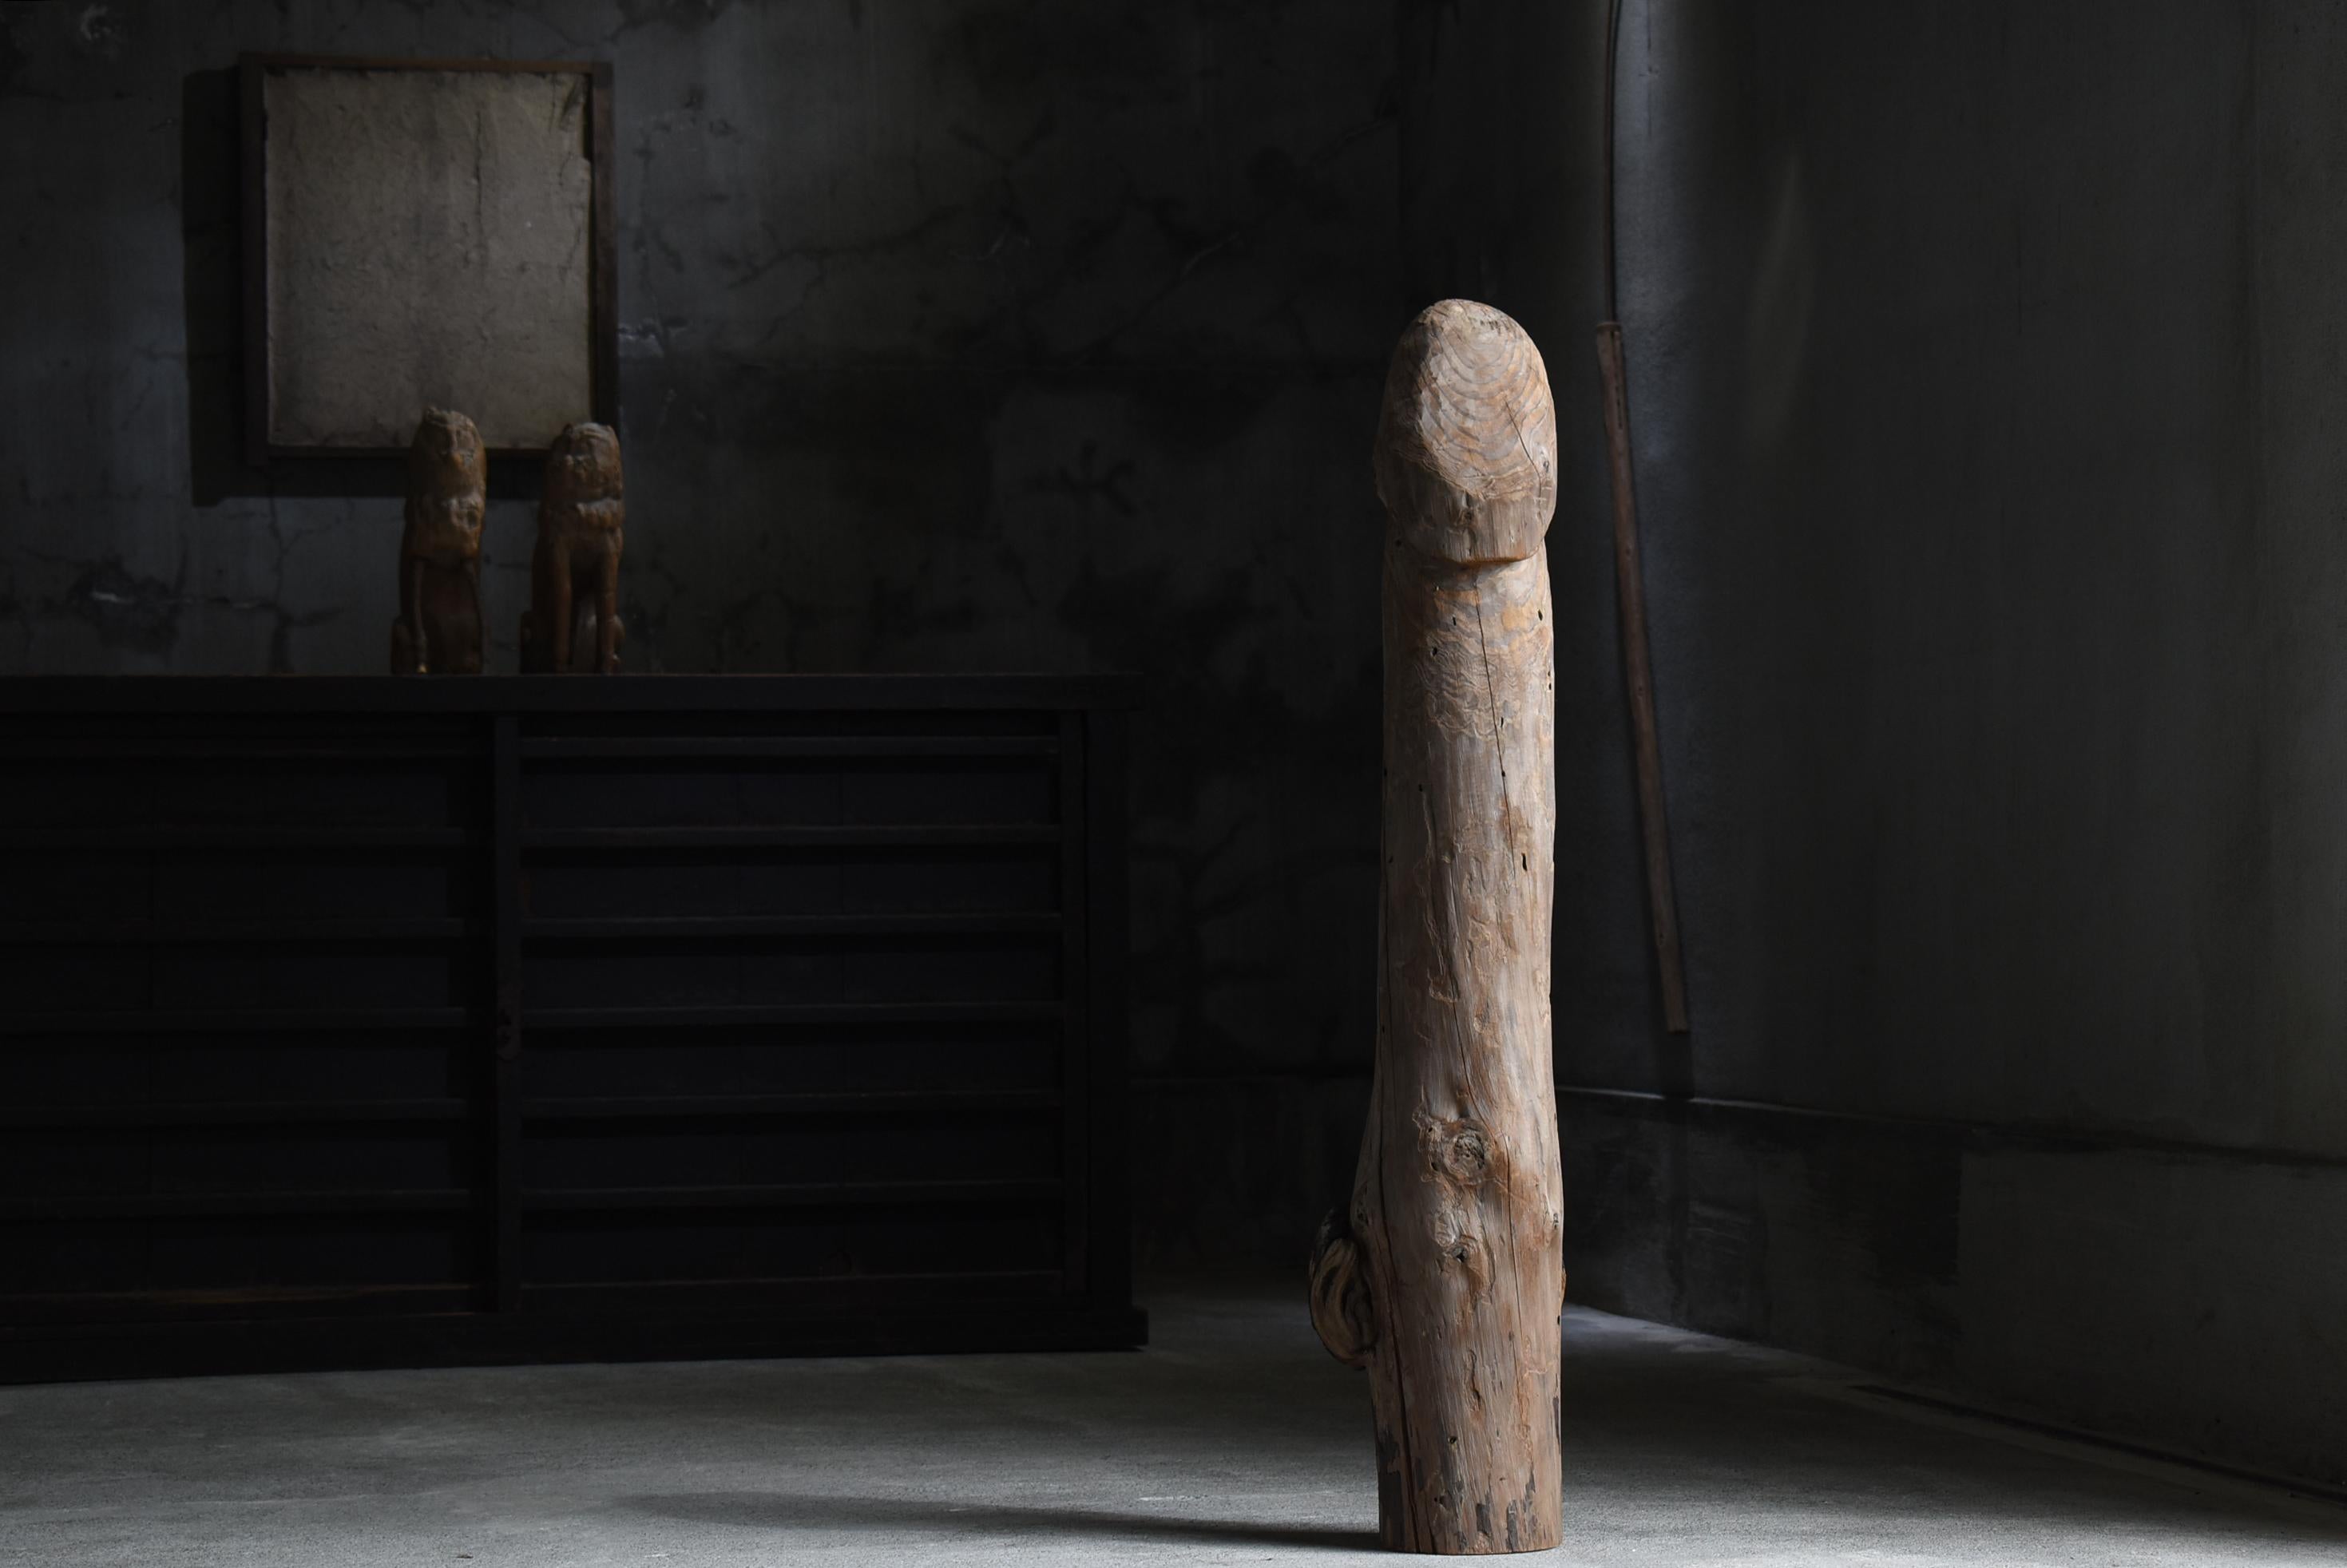 This is an old Japanese wood carving of a giant penis.
It is from the Meiji period (1860s-1900s).
It is made of pine wood.

This is a unique item that utilizes the natural shape of the tree.

This is a votive offering.
There are shrines dedicated to